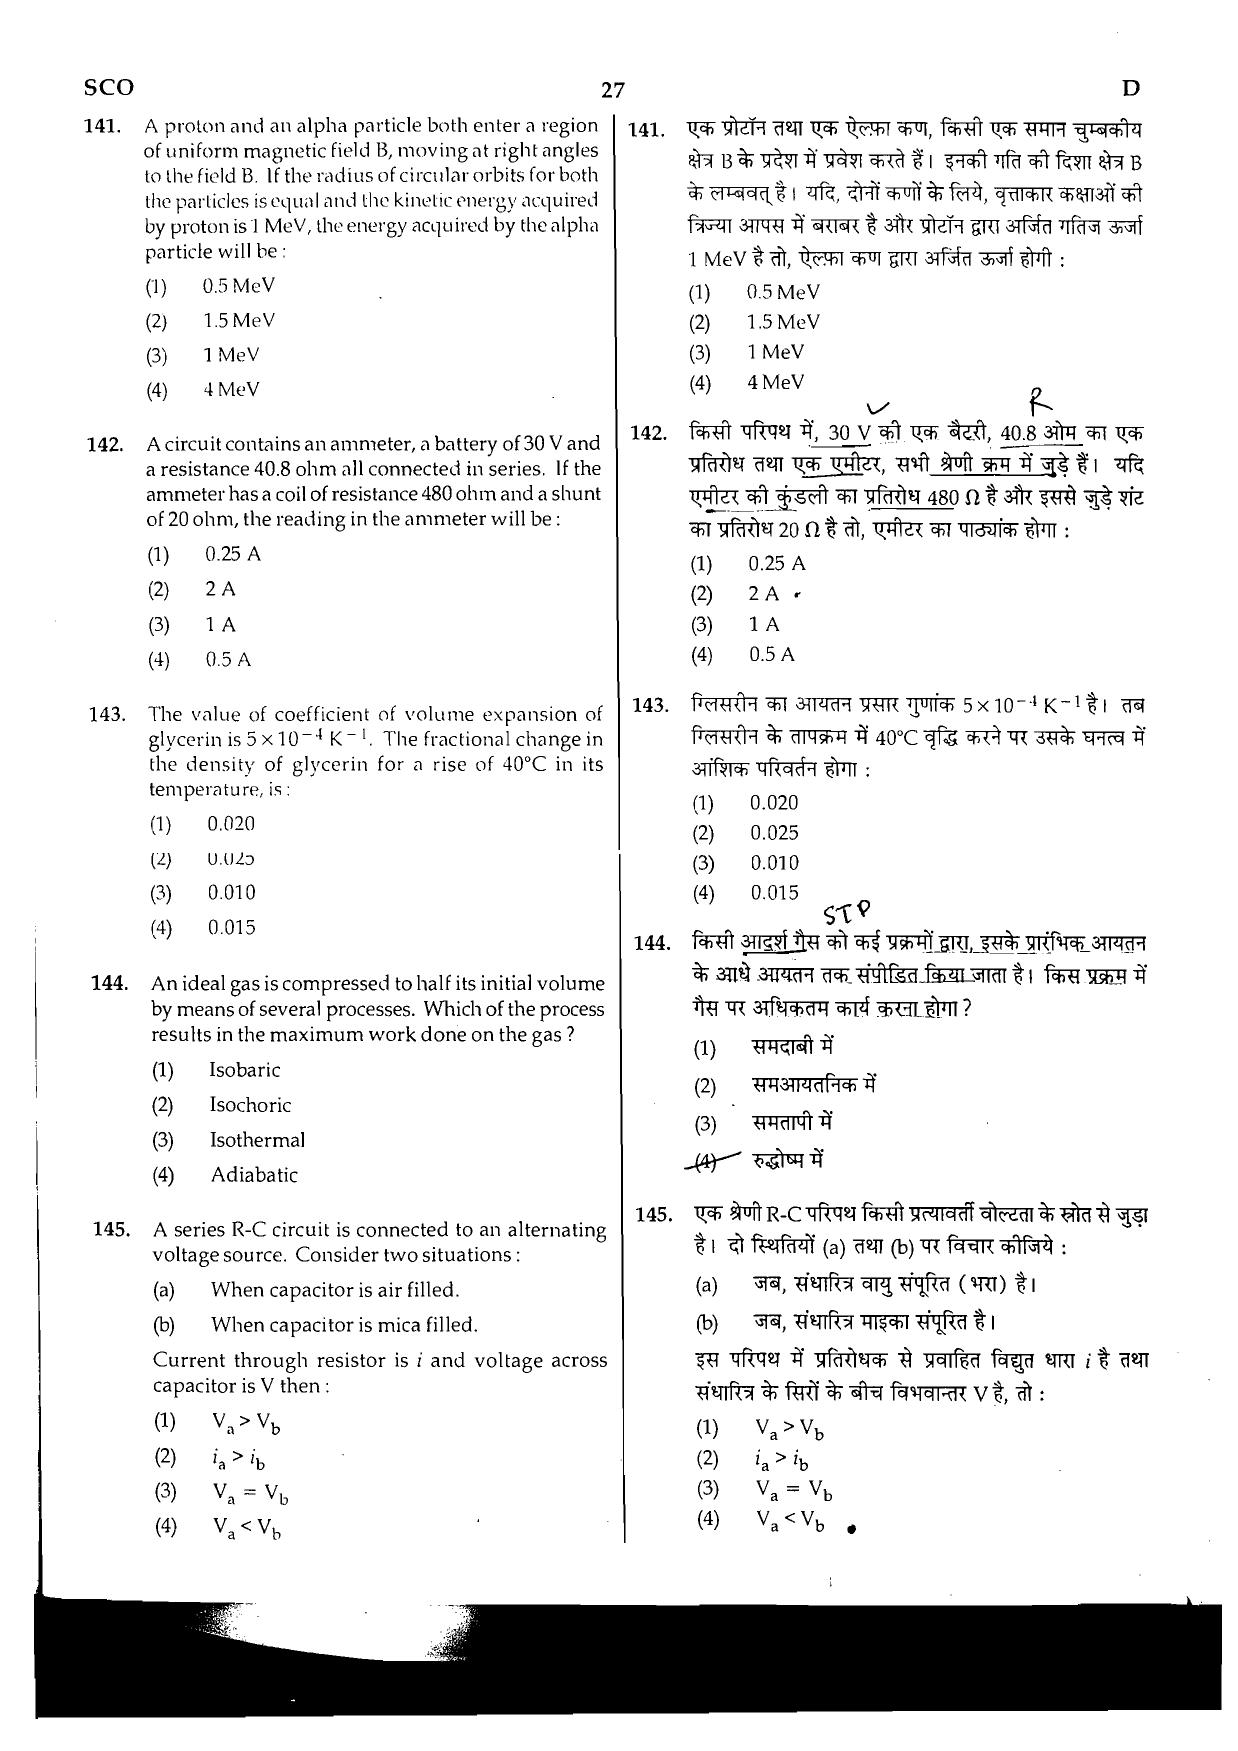 NEET Code D 2015 Question Paper - Page 27